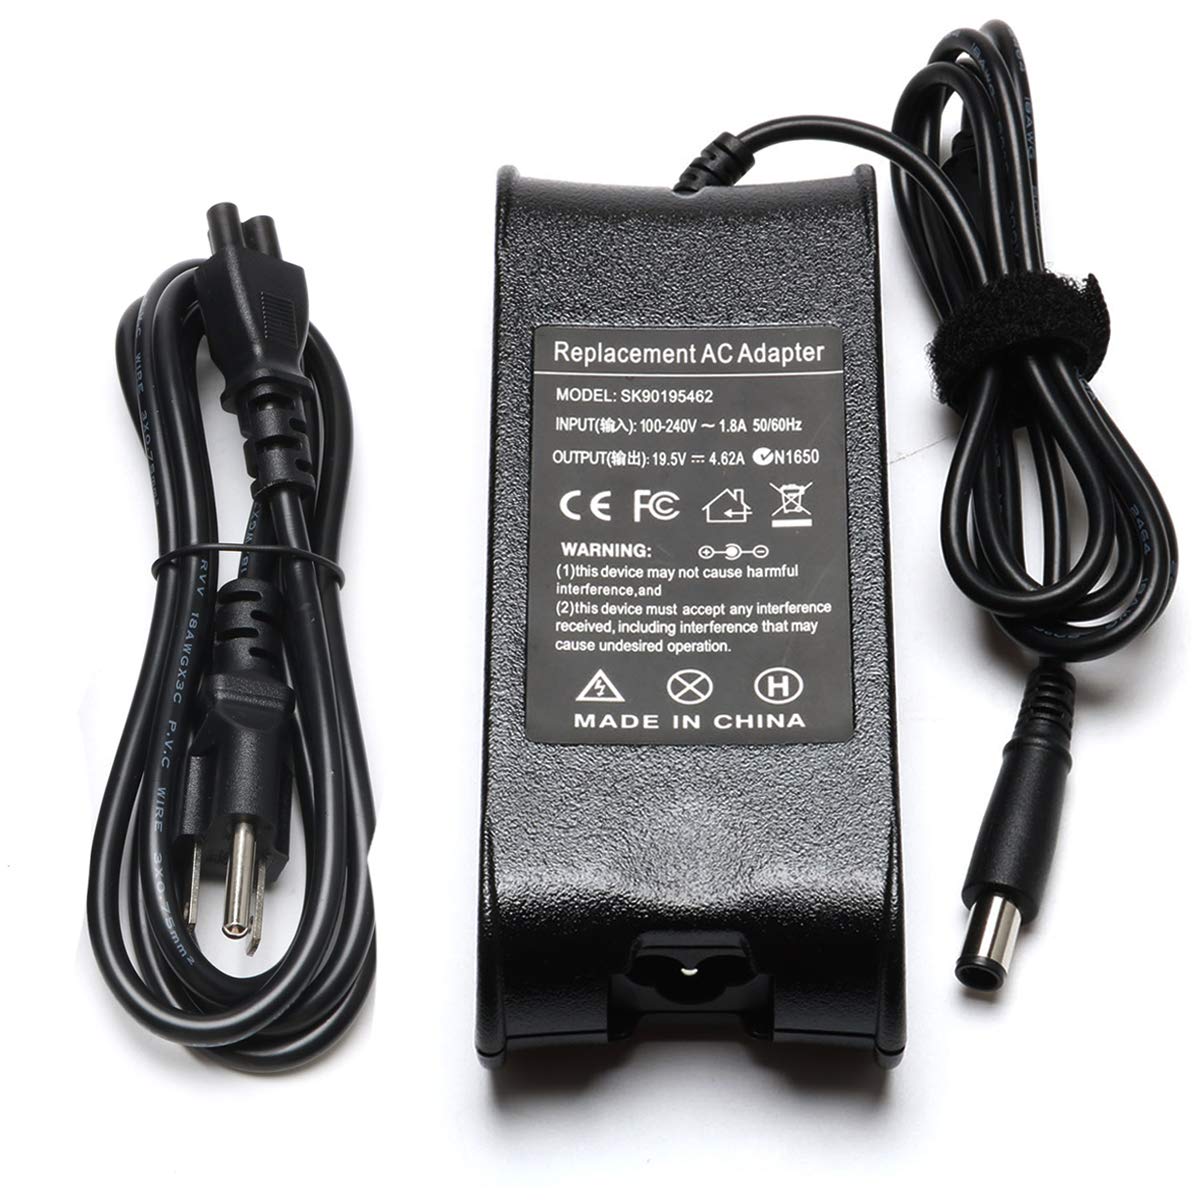 Mua 65W Laptop Charger Compatible for Dell Latitude E6430 E6230 E6320 E6410  E6420 7480 7280 5480 E7470 E7450 E7440 E5470 Charger Power Supply Cord  09RN2C 9T215 7W104 5U092 XD733 Charger trên Amazon